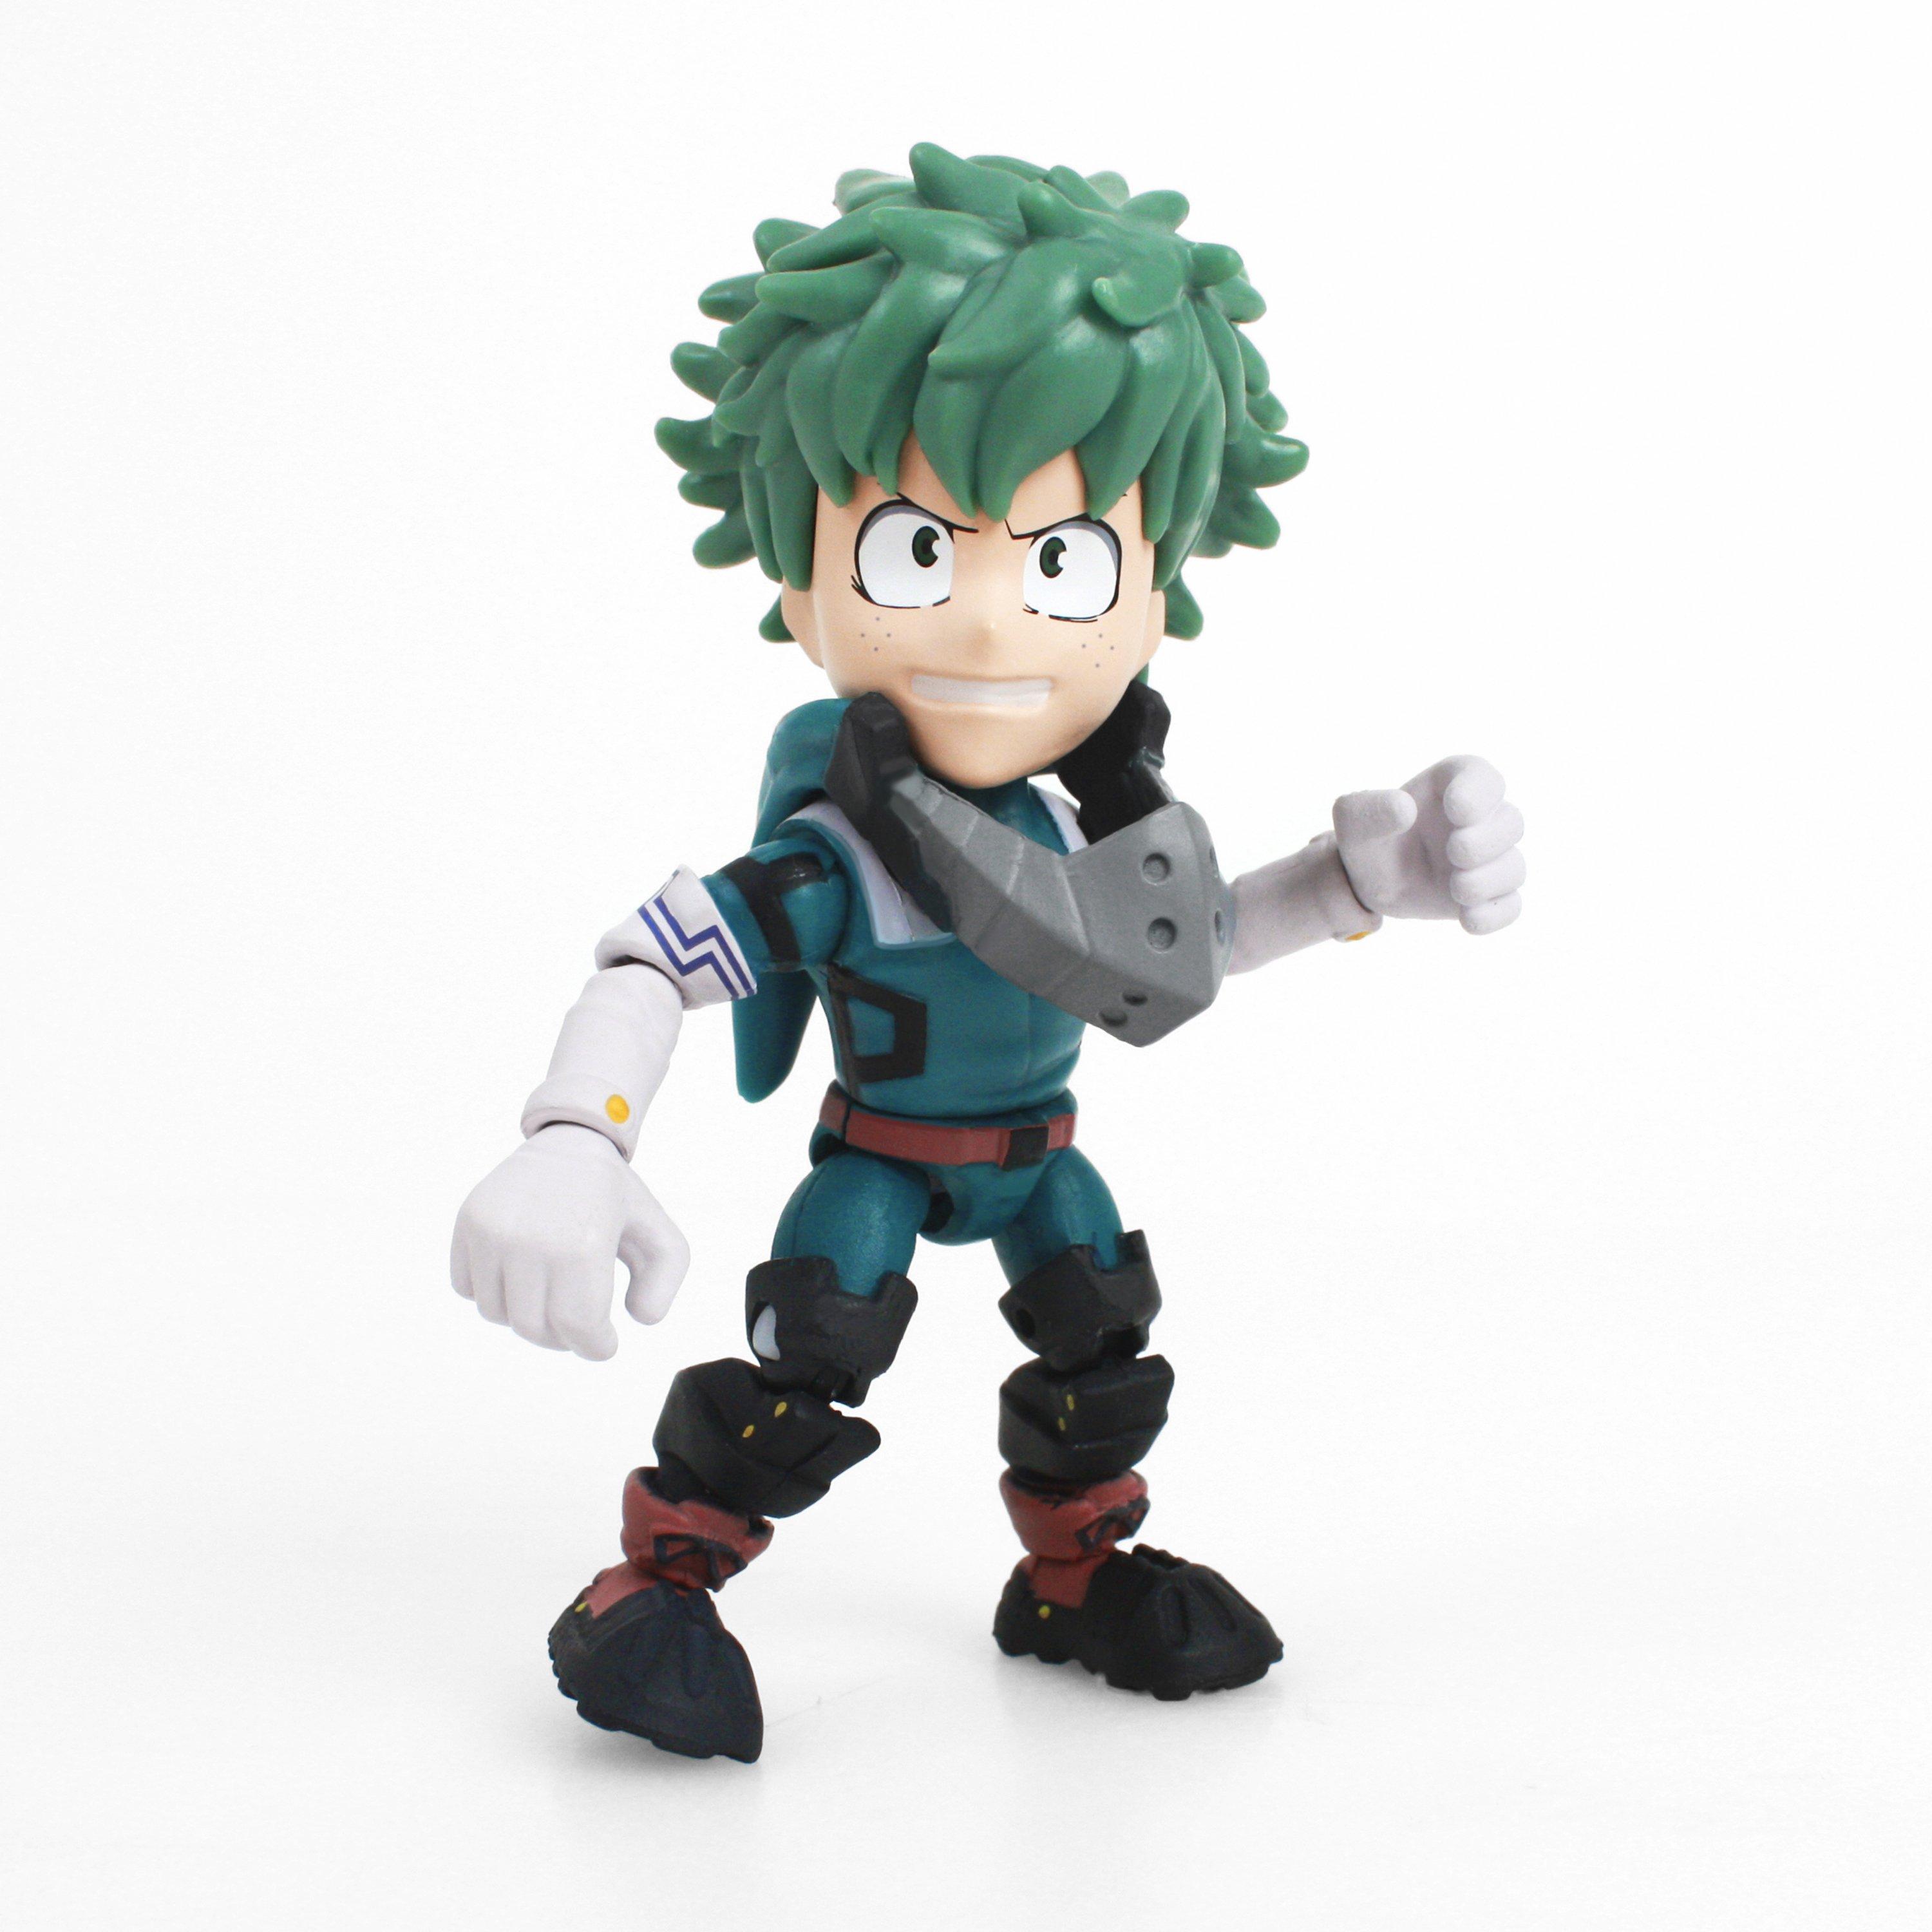 Bandai My Hero Academia Loyal Subjects Blind Box Mini Only at GameStop 3-in Action Figure